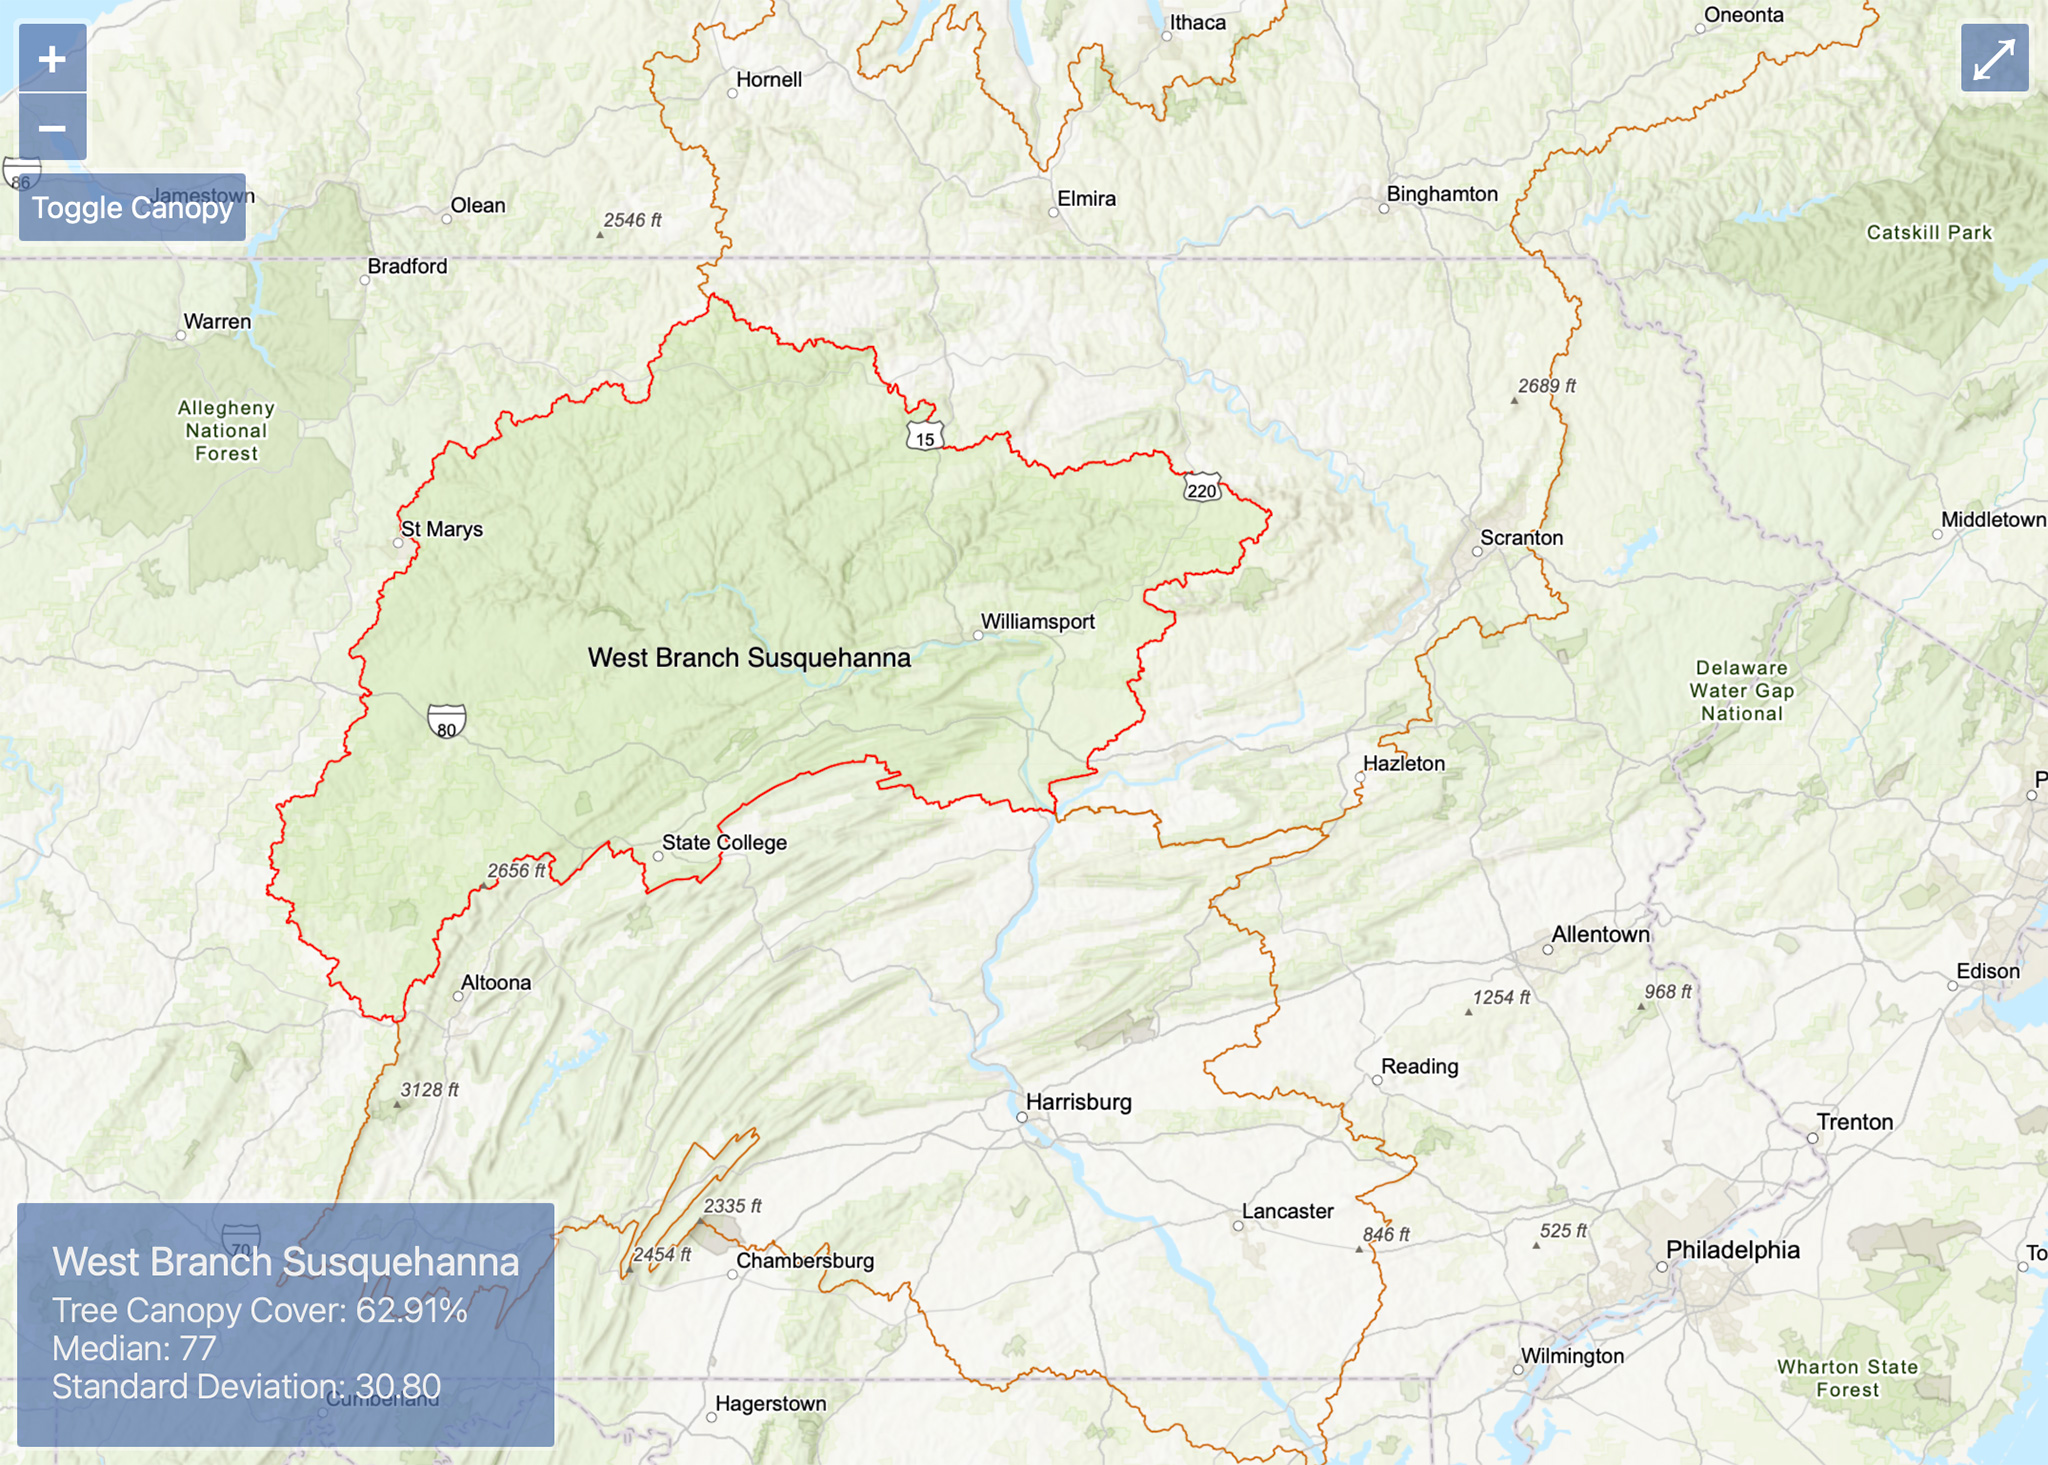 Screenshot of an interactive map of the Susquehanna Watershed.